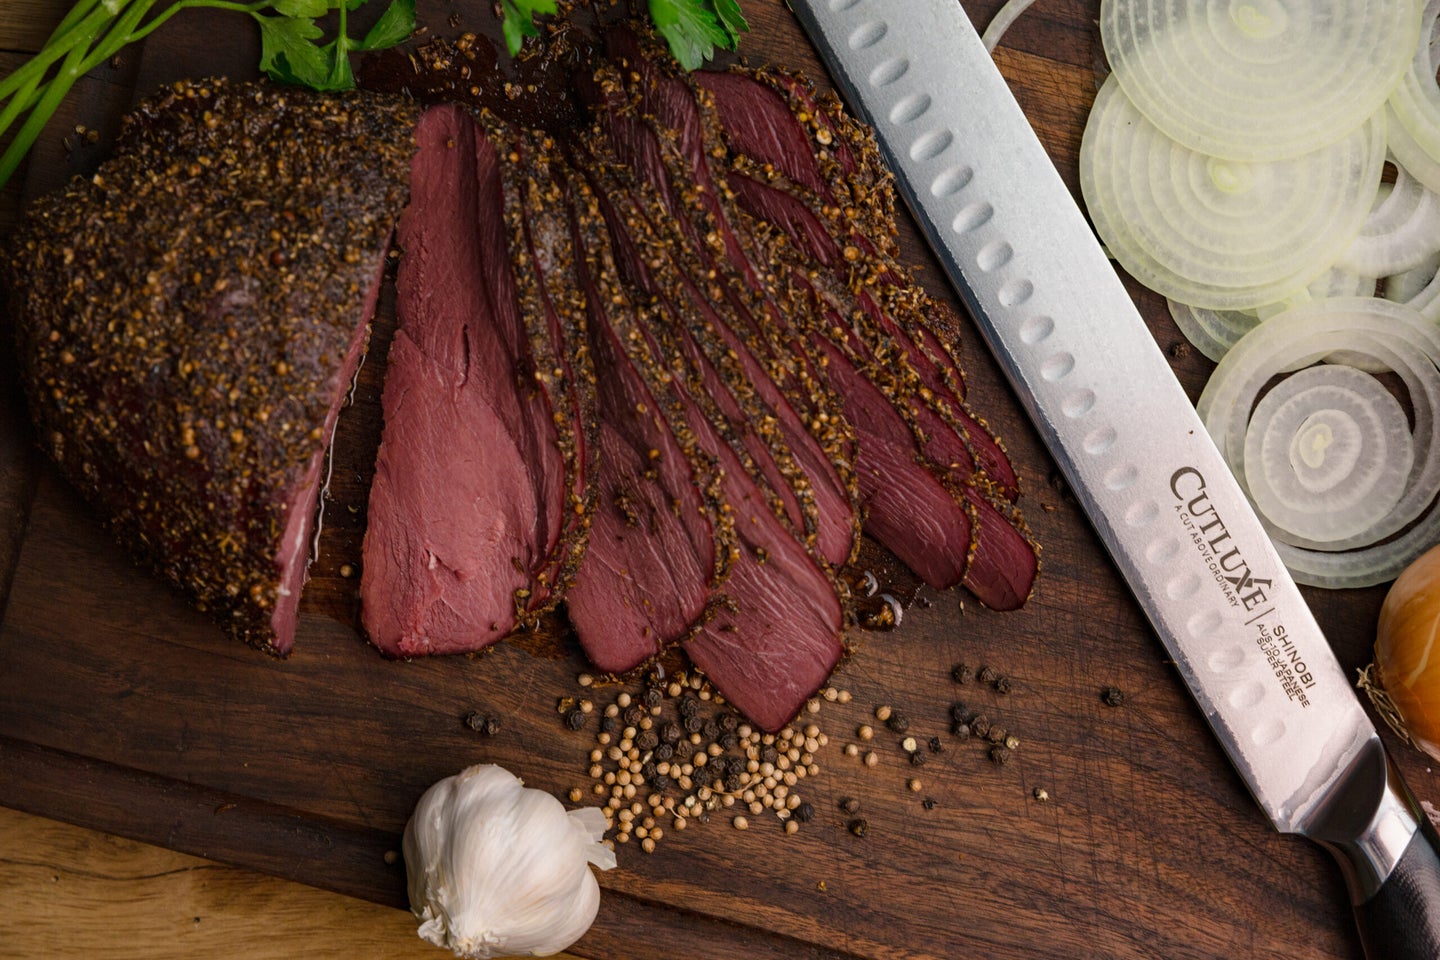 Slices of venison pastrami sit on a wooden cutting board next to a knife and garlic.